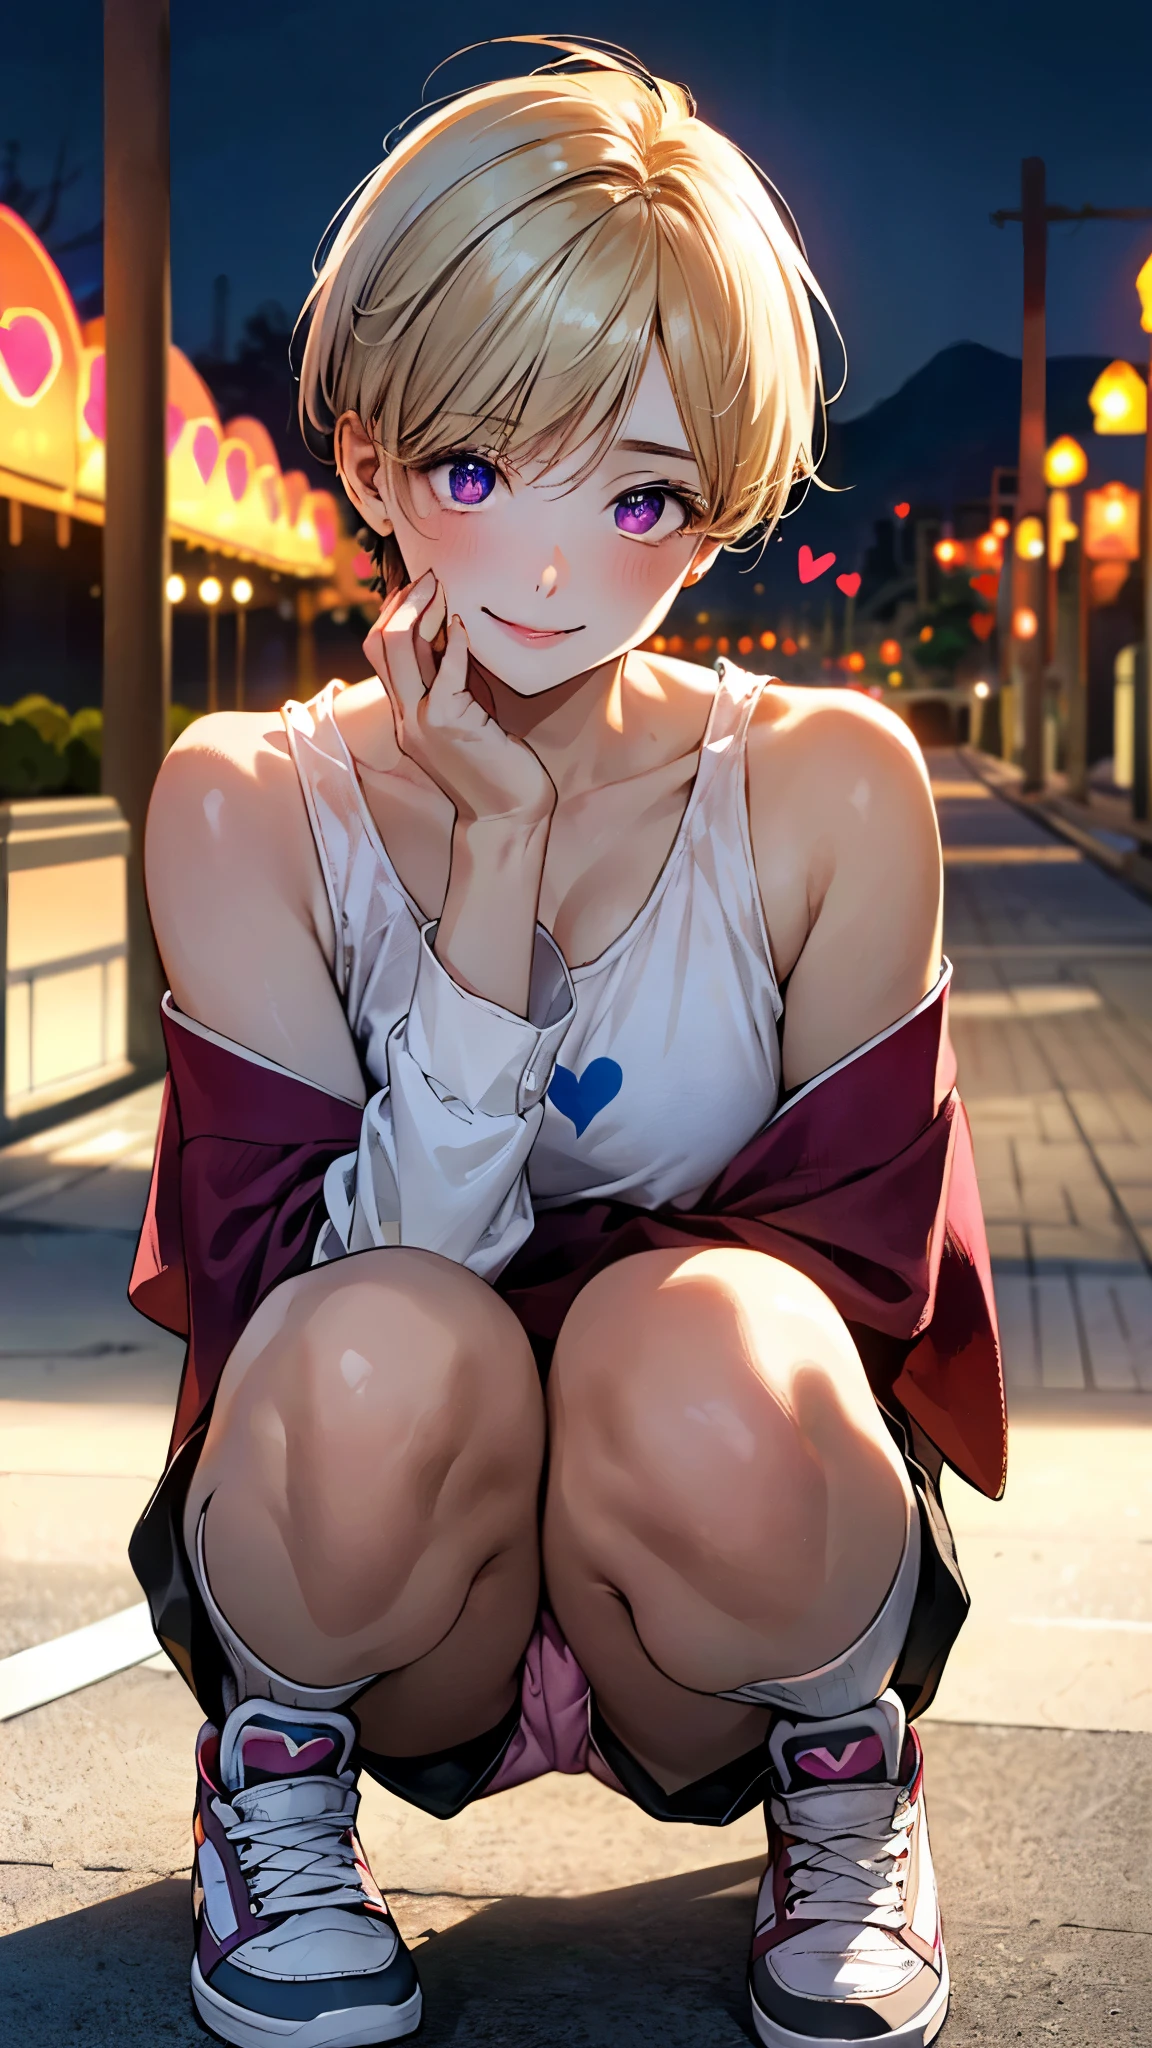 (masterpiece:1.3, top-quality, ultra high res, ultra detailed), (realistic, photorealistic:1.4), beautiful illustration, perfect lighting, natural lighting, colorful, depth of fields, 
beautiful detailed hair, beautiful detailed face, beautiful detailed eyes, beautiful clavicle, beautiful body, beautiful chest, beautiful thigh, beautiful legs, beautiful fingers, 
looking at viewer, (front view), 1 girl, japanese, very cute girl, (shy and sensual), (perfect anatomy, anatomically correct, super detailed skin), cute and symmetrical face, babyface, shiny skin, 
(short hair, pixie cut, blonde hair), swept bangs, purple eyes, shining eyes, long eyelashes, (medium breasts, , seductive thighs), perfect face, perfect eyes, sexy body, slender, 
(super tight mini boxer shorts with heart pattern, heart print on shoulder, long sleeve, pink jordan sneakers), 
(beautiful scenery), evening, (amusement park), squatting, (lovely smile, upper eyes), 